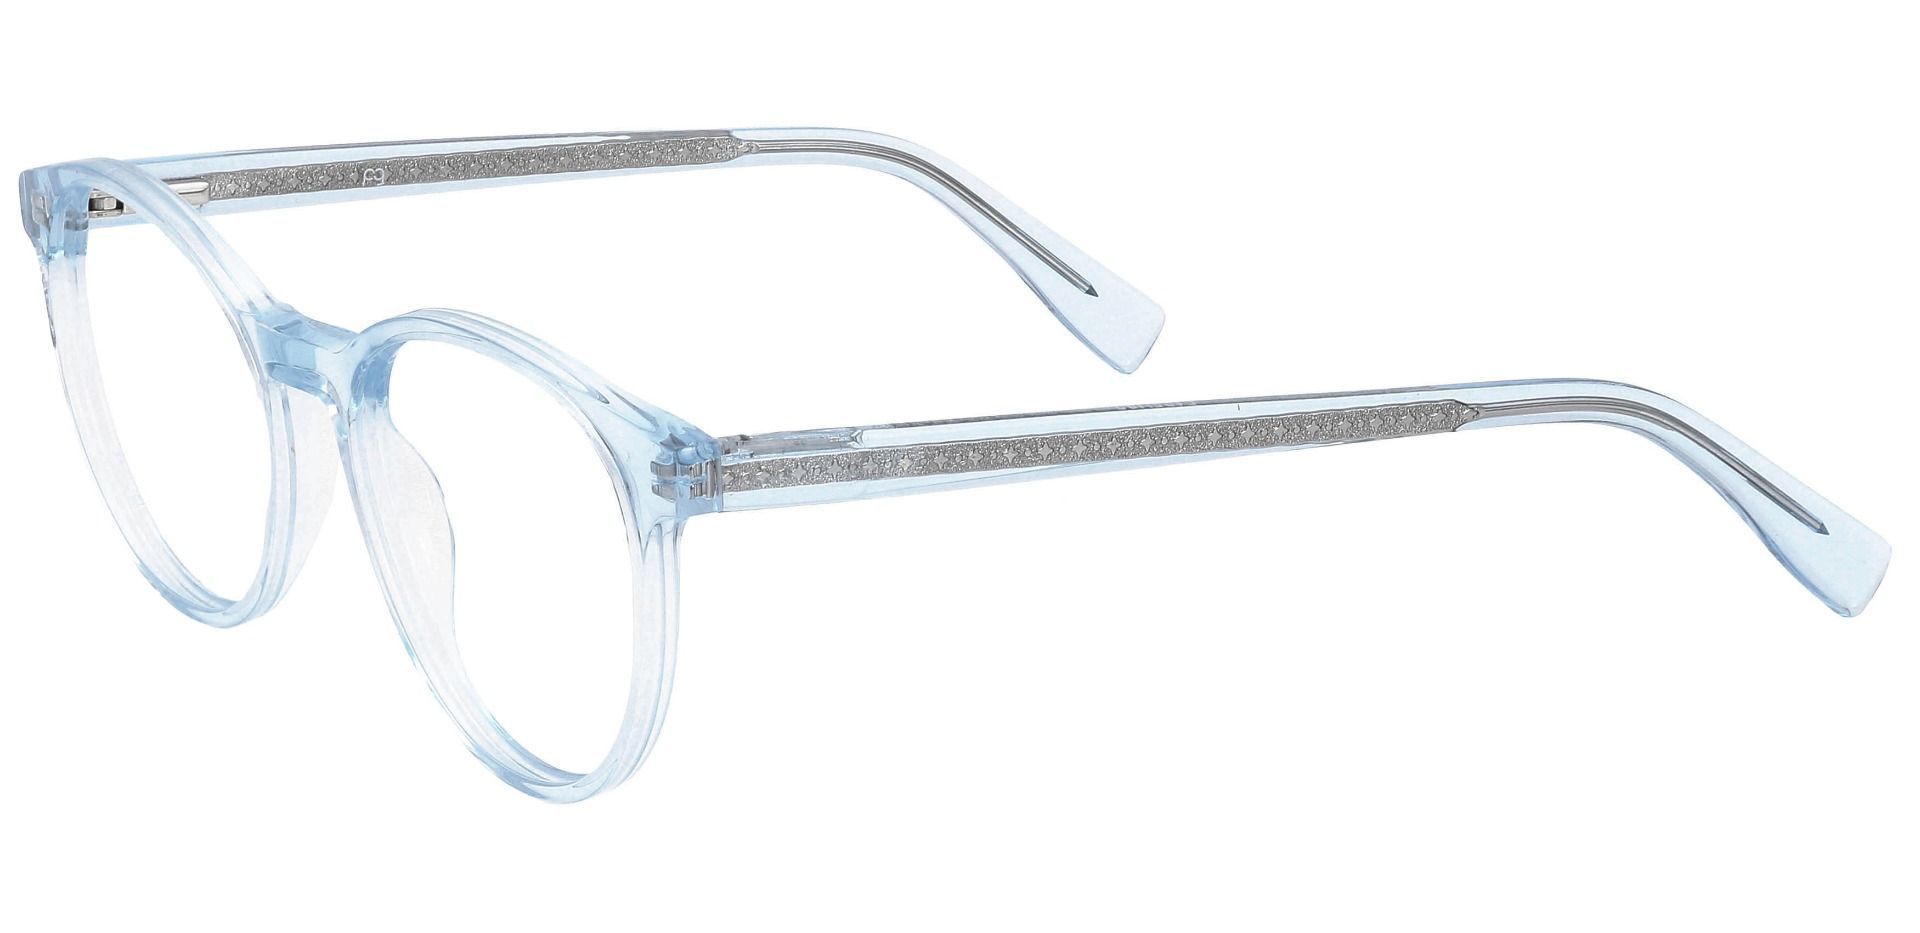 Stellar Oval Progressive Glasses - The Frame Is Clear With Light Blue